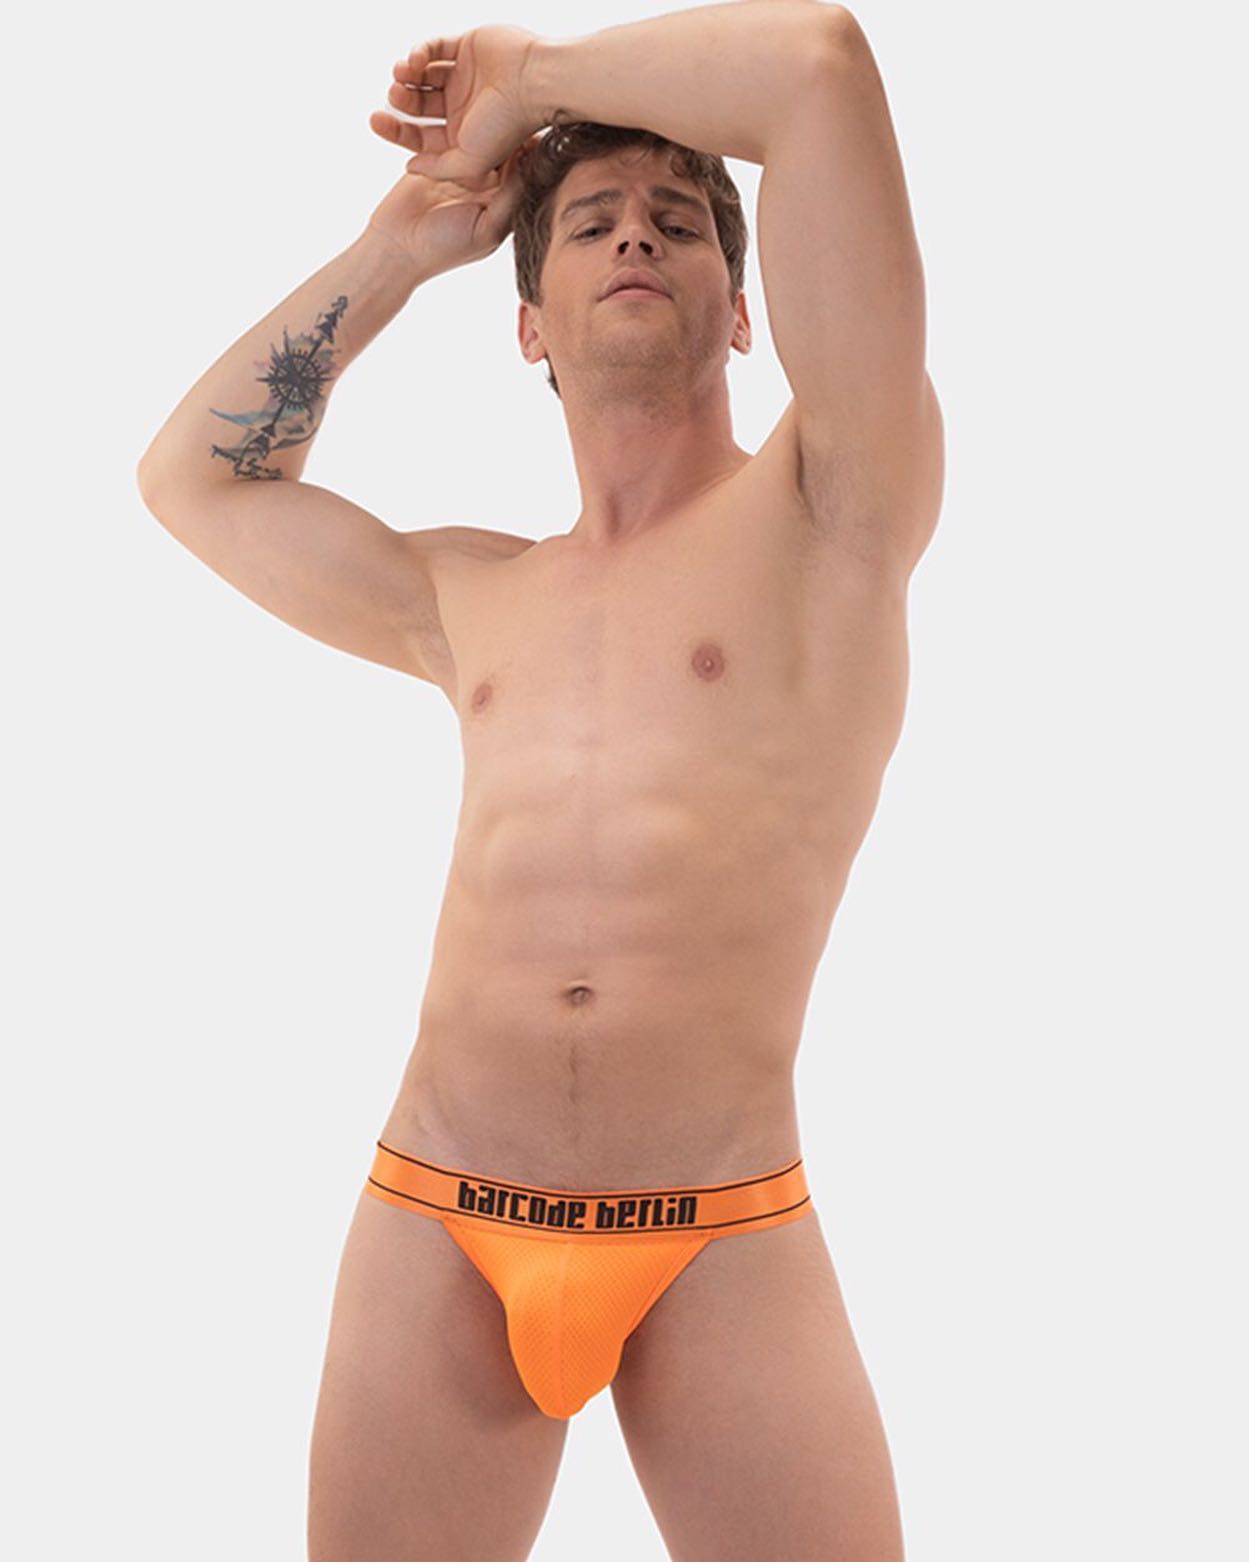 Just arrived! The sexy Brief Tjure of Barcode Berlin in neon orange is an athletic style underwear with a comfortable pouch that fits your shape and caresses you:
______
https://menandunderwear.com/shop/underwear/barcode-berlin-brief-tjure-neon-orange